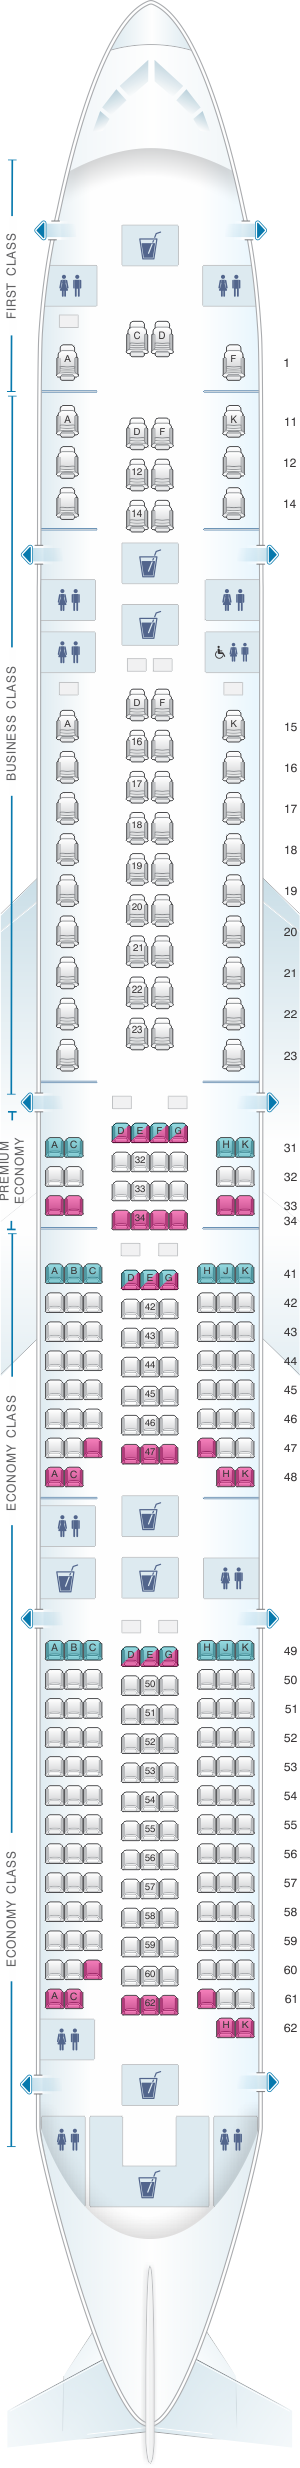 Seat Map Singapore Airlines Boeing B777 300er Four Class Seatmaestro